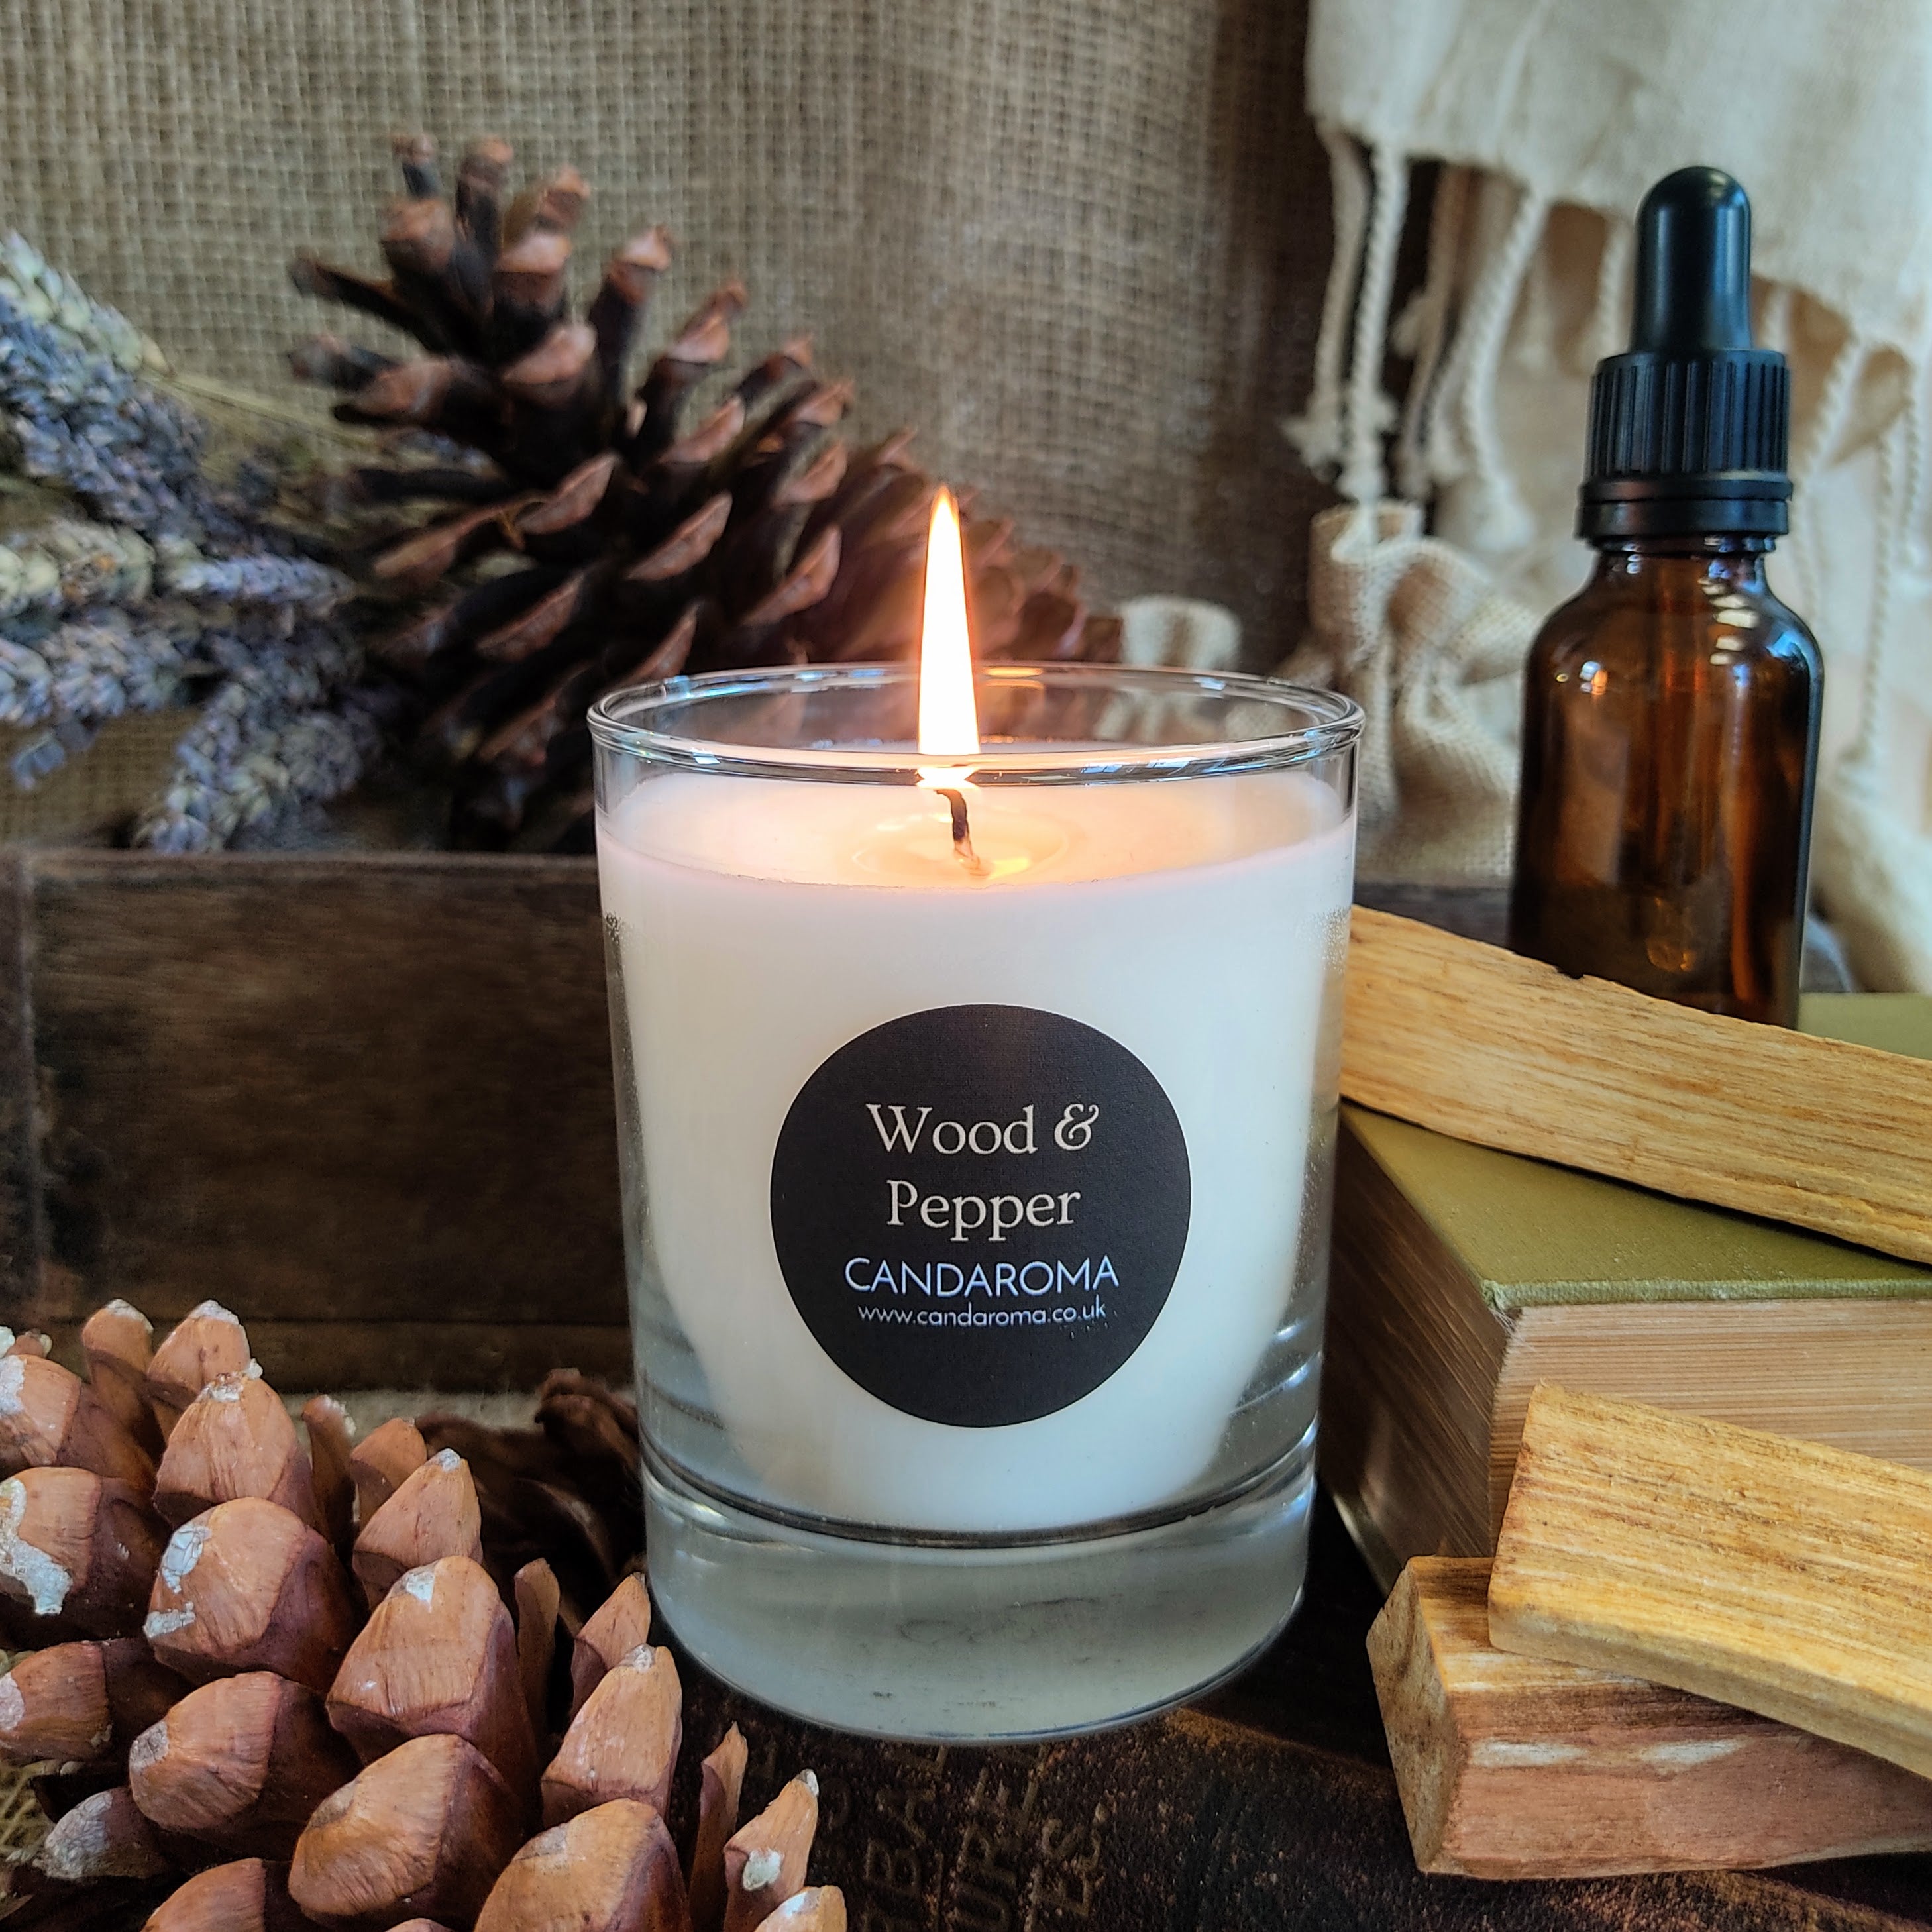 Wood & pepper soy blend candle